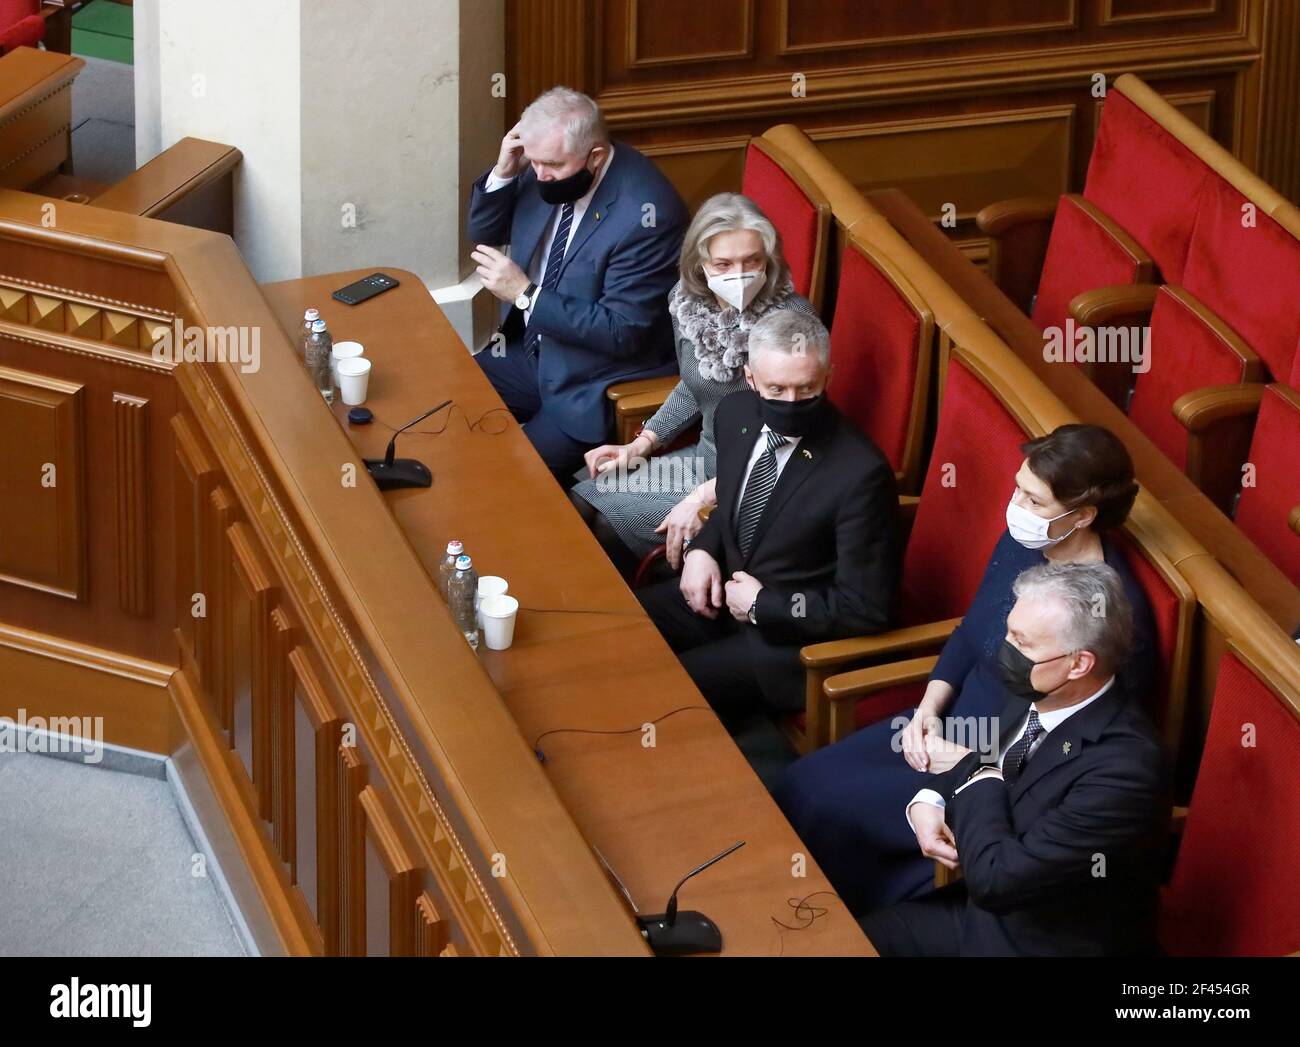 KYIV, UKRAINE - MARCH 19, 2021 - President of the Republic of Lithuania Gitanas Nauseda and First Lady Diana Nausediene (R to L) are pictured during a sitting of the Verkhovna Rada, Kyiv, capital of Ukraine. Credit: Ukrinform/Alamy Live News Stock Photo